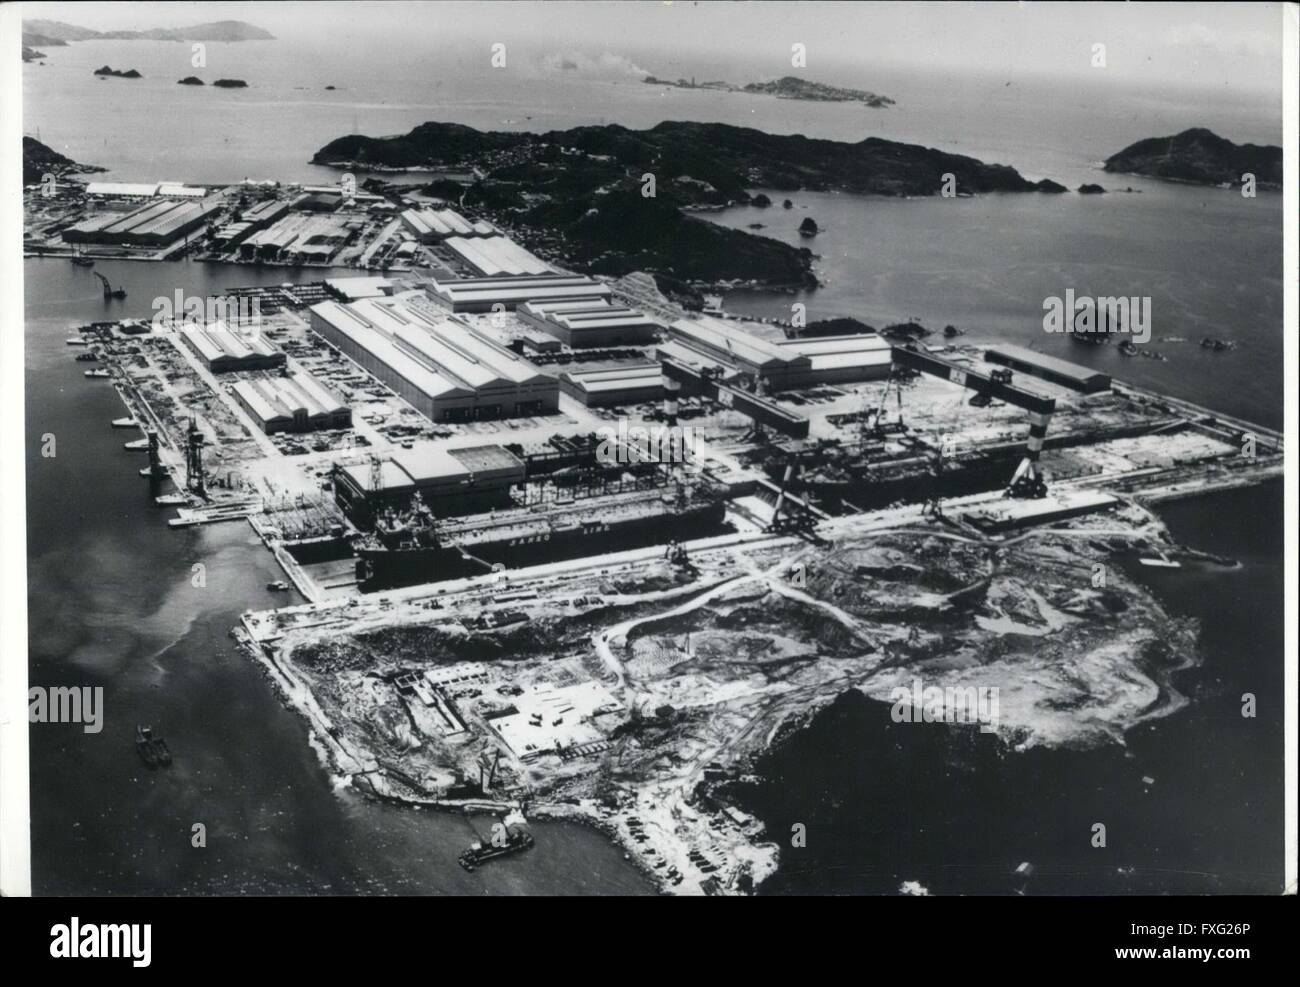 1956 - Japan Opens World's Biggest Shipyard. The world's largest shipyard, which can build three mammoth tankers at the same time, was opened this week at Nagasaki, Japan by Mitsubishi Heavy Industries. The one-miIiion-ton facility cost 40,000 million Yen (&pound;50 million)., and is 990 meters in length, 100-meters in width, and has two 600-ton gantry cranes. The company will have 10 vessels to build this year in the 260,000-class. Next year a repair dock will be added to take ships up to 500,000-ton. Photo: An aerial view of the world's biggest shipyard at Nagasaki, Japan. (Credit Image: © K Stock Photo